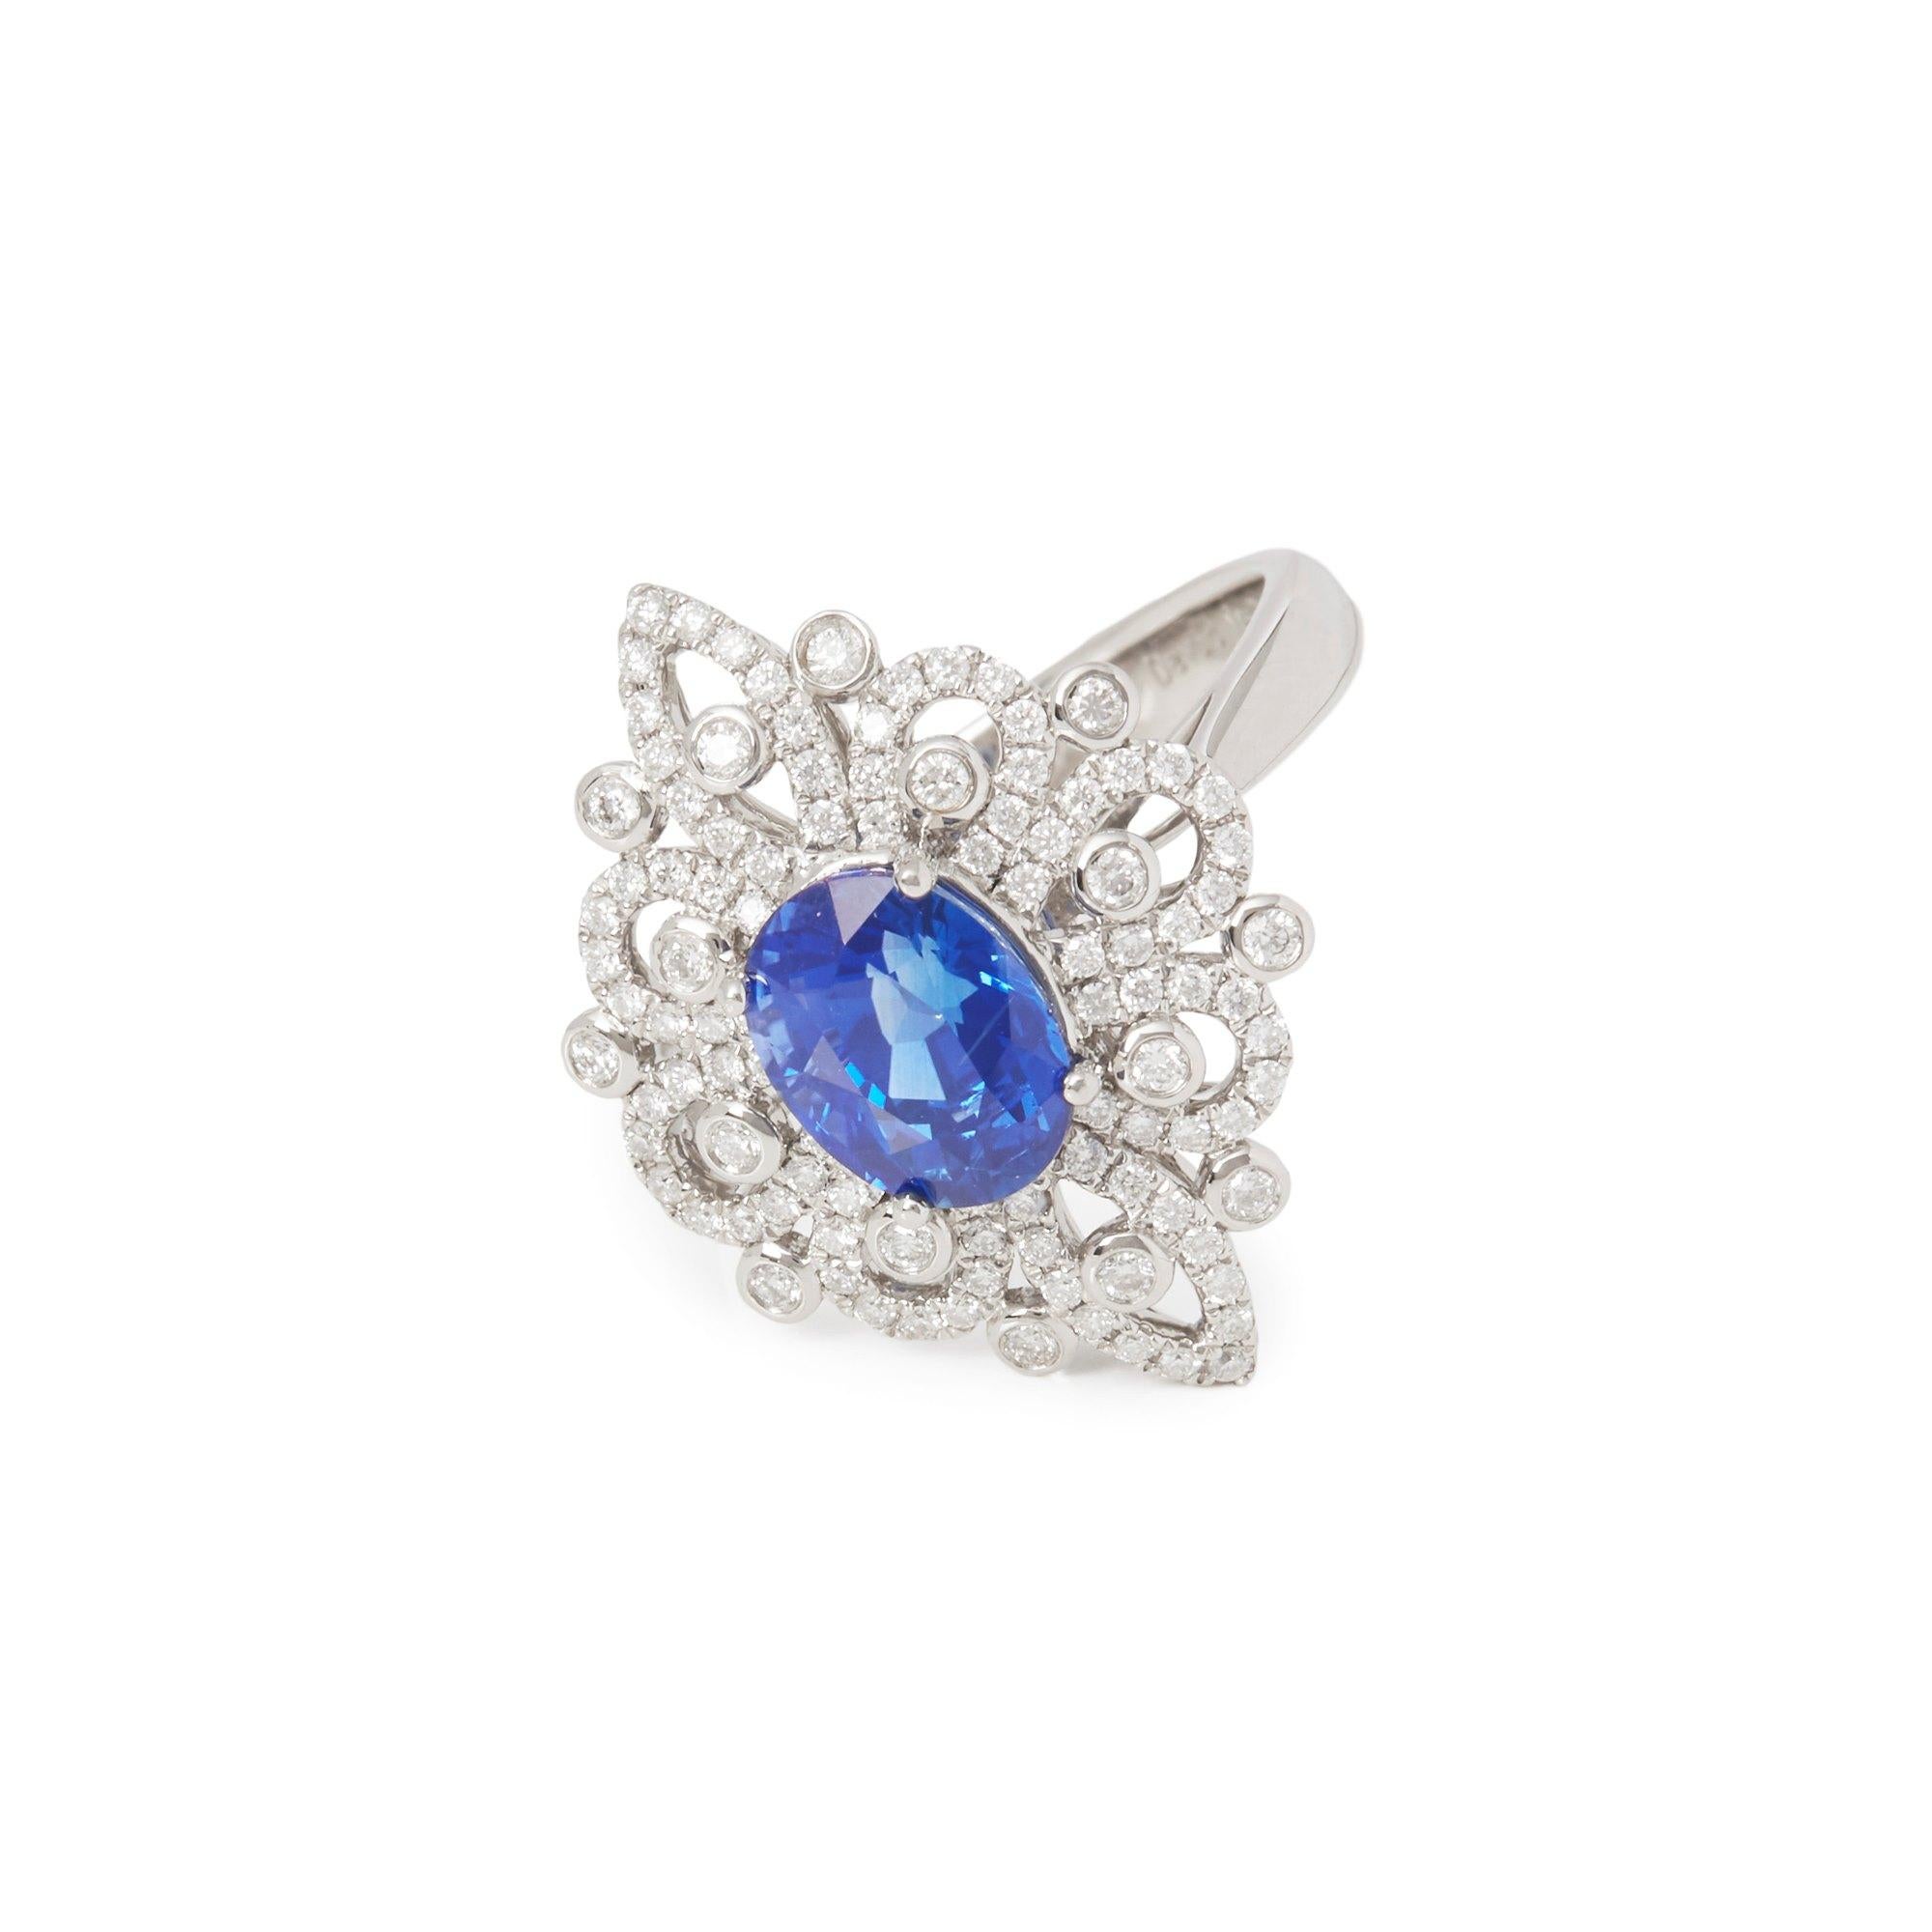 This ring designed by David Jerome is from his private collection and features one oval cut Sapphire totalling 2.20cts sourced in Sri Lanka. Set with round brilliant cut Diamonds totalling 0.60cts mounted in a platinum setting. Finger size UK N, EU